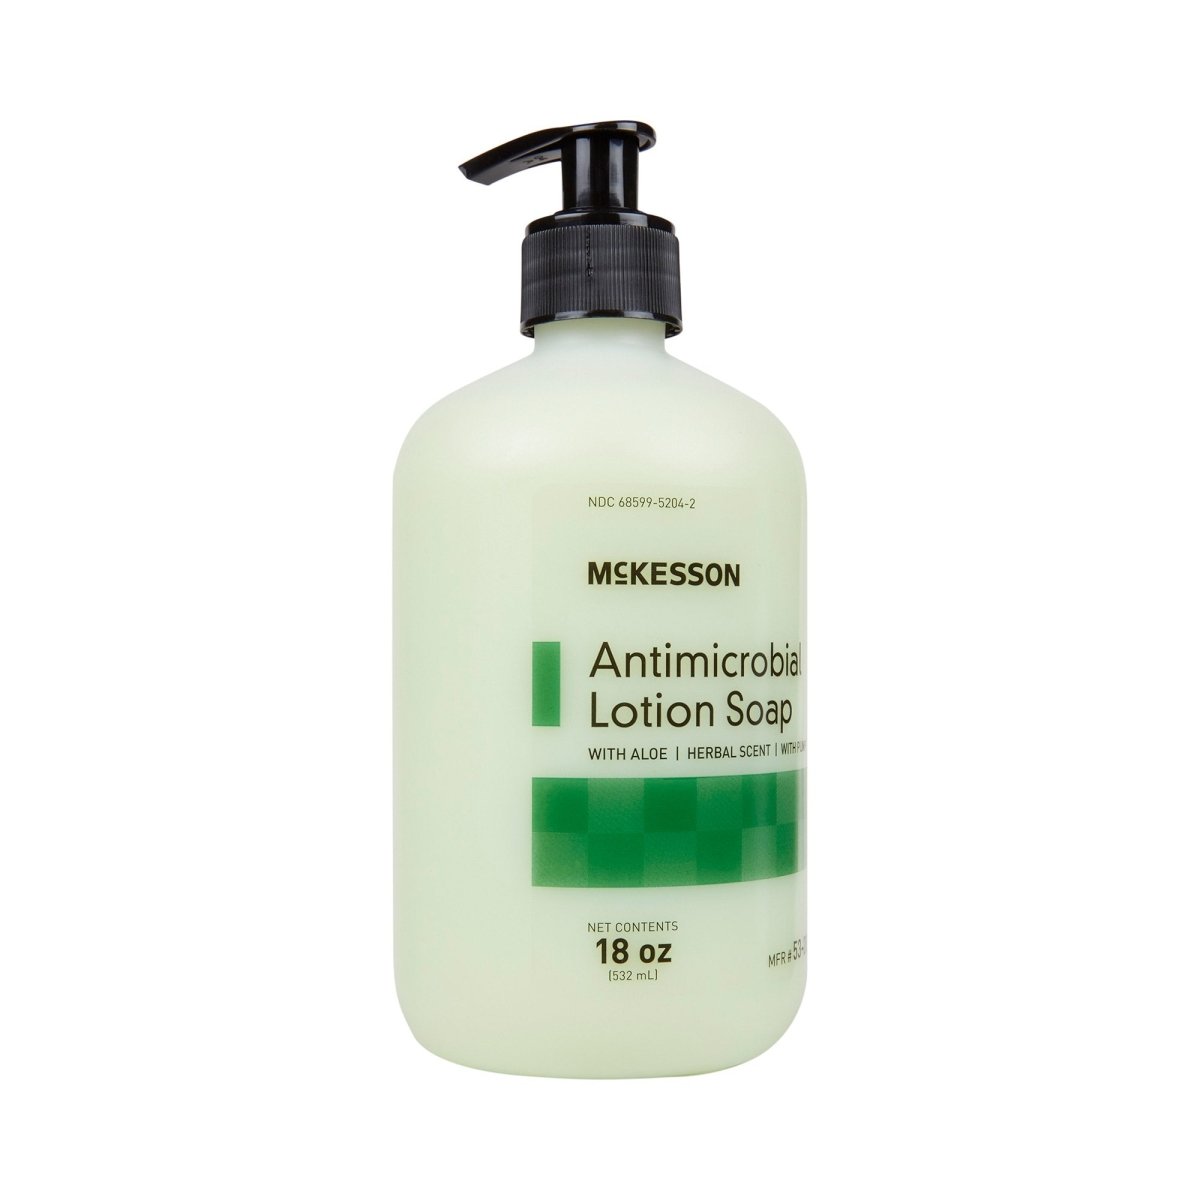 McKesson Antimicrobial Lotion Soap, Herbal Scent, 0.95% Strength - 937908_EA - 4